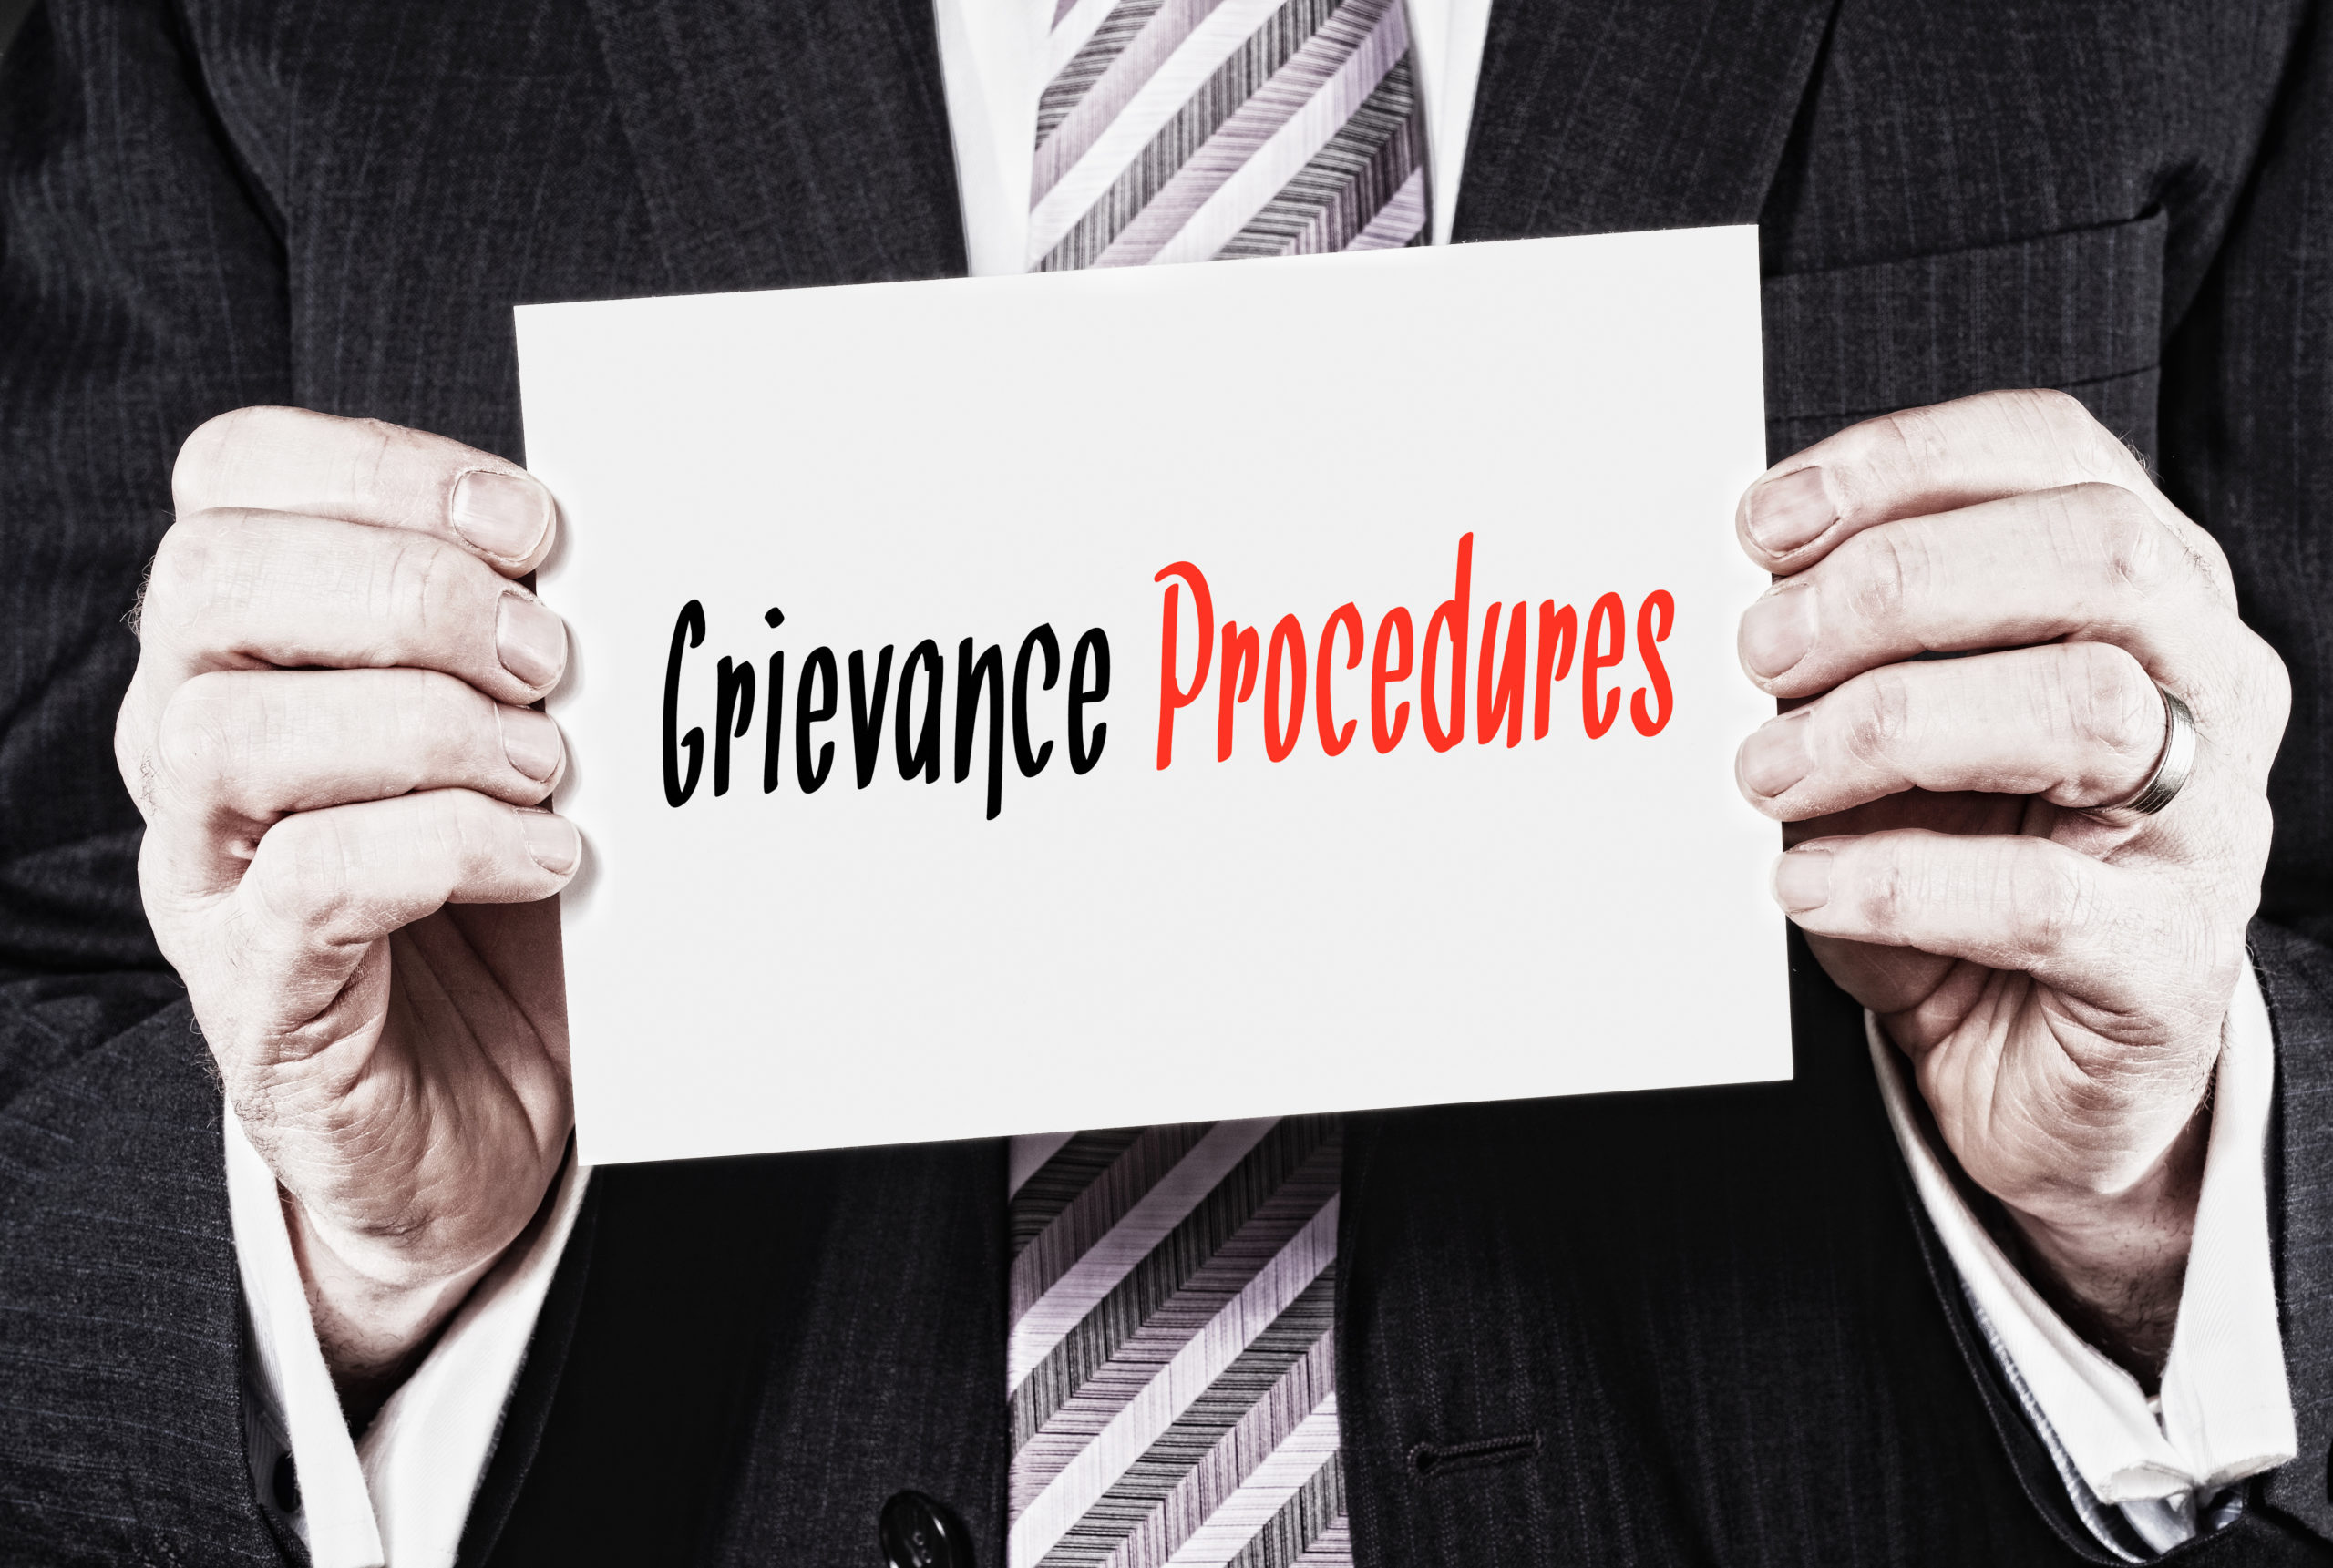 Handling Employee Incidents and Grievances